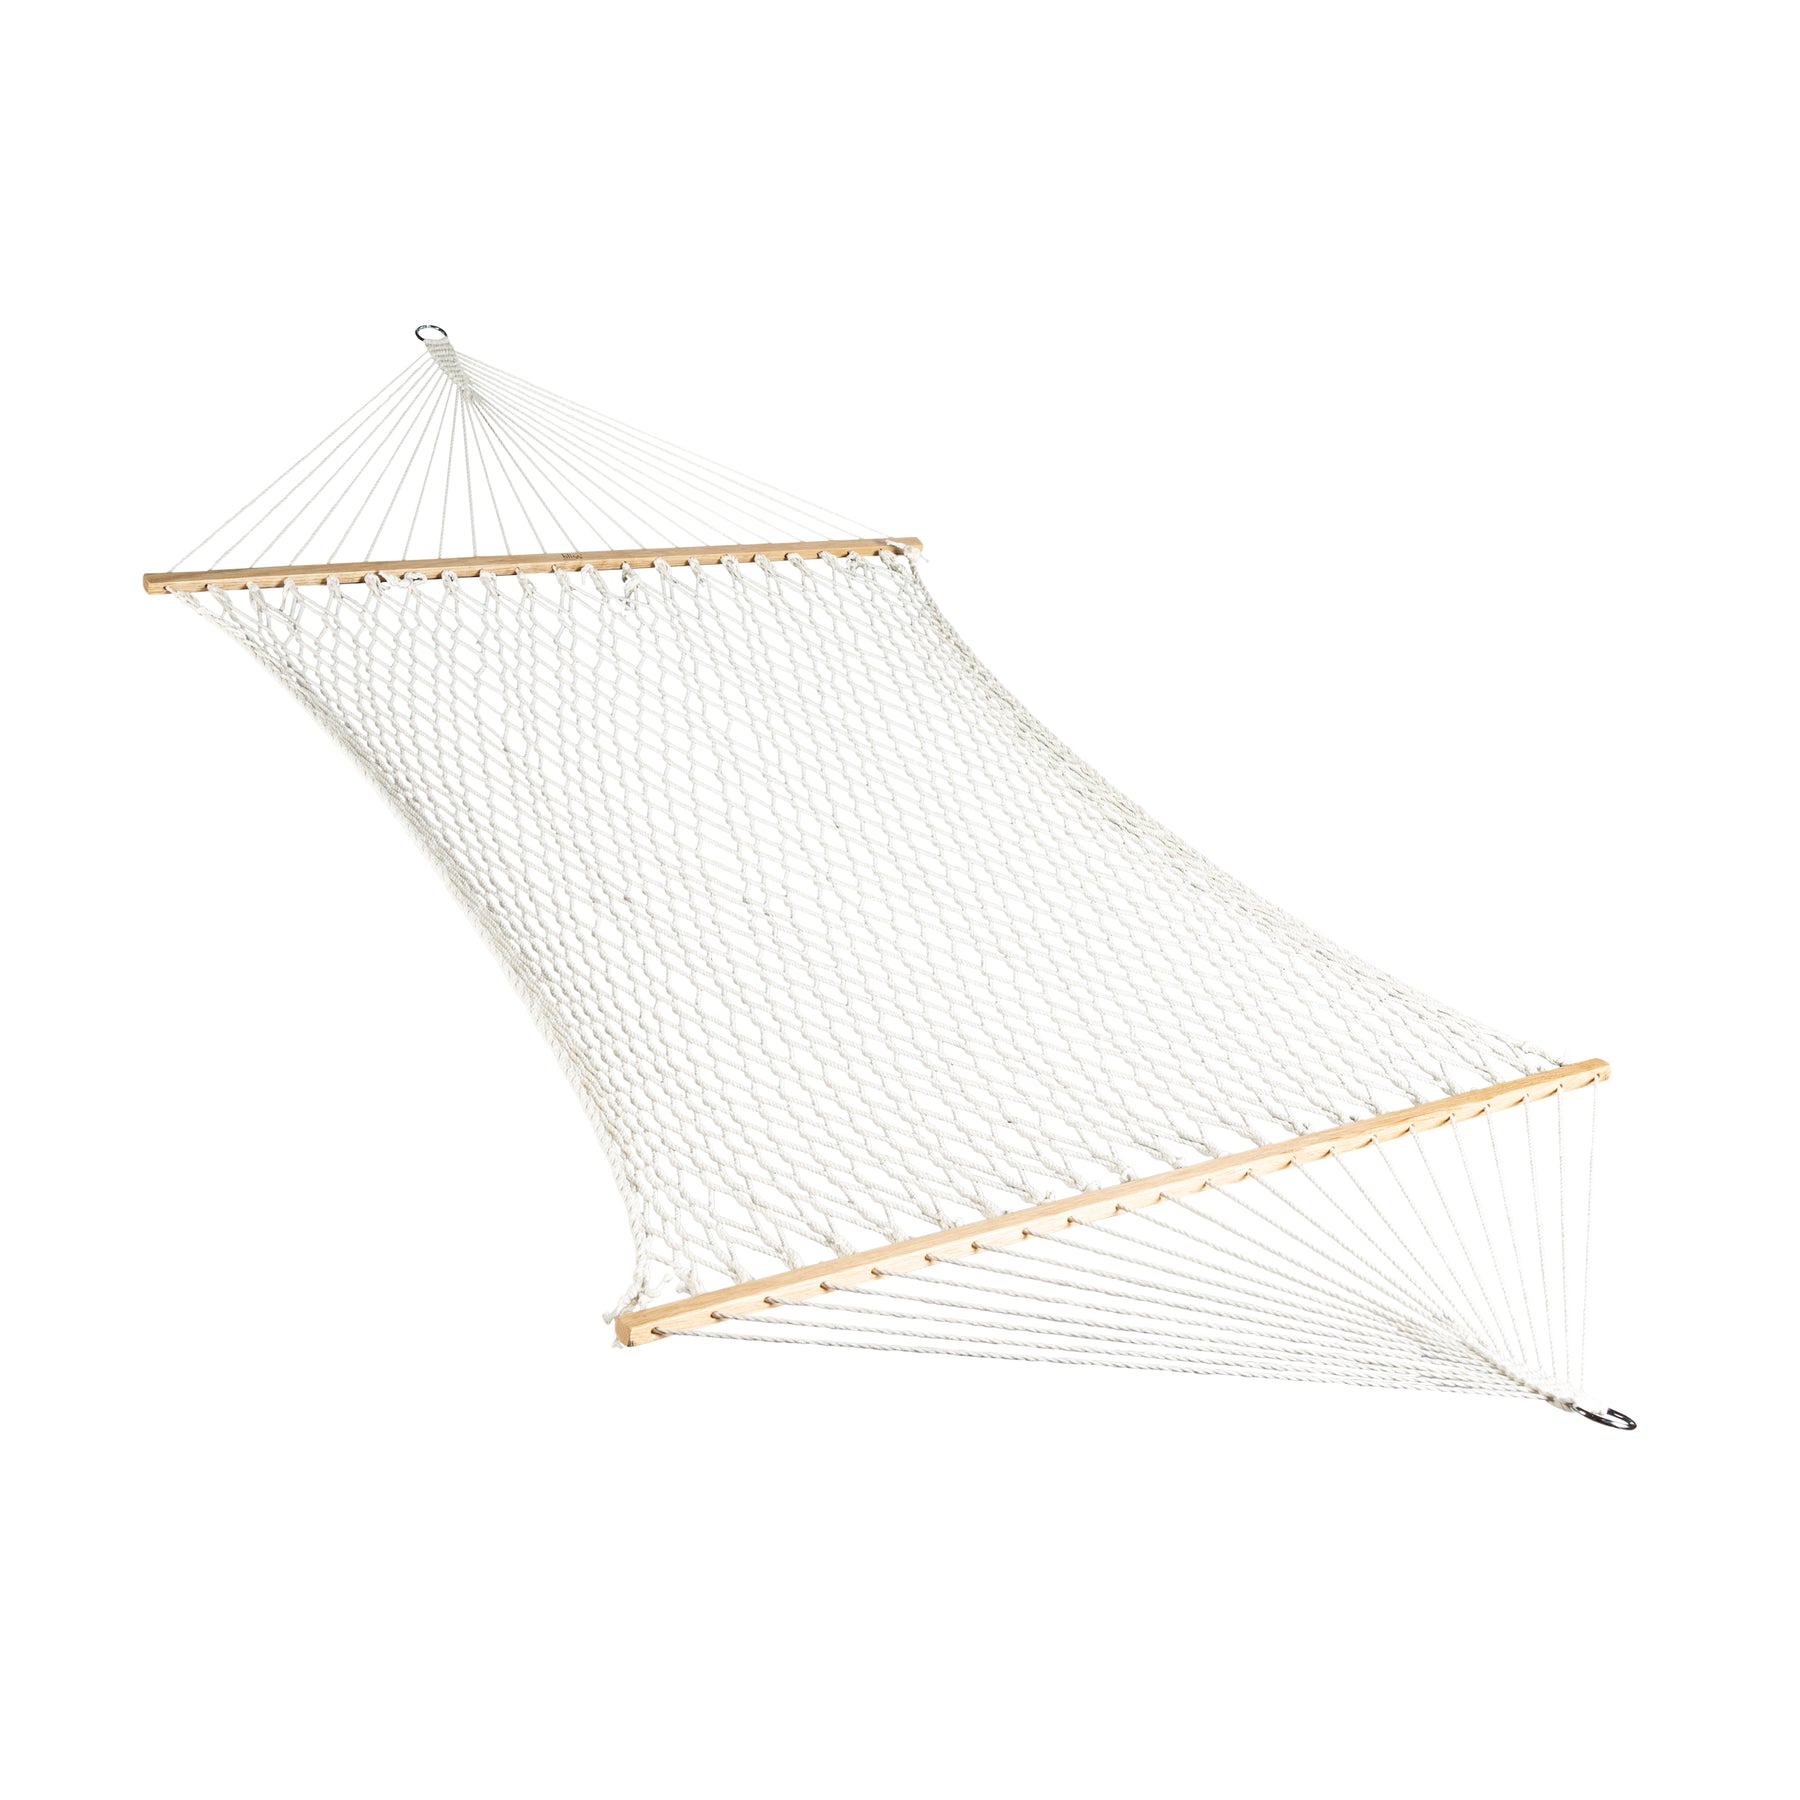 Bliss Hammocks 60-inch Wide Cotton Rope Hammock with Spreader Bar, S Hooks, and Chains in the white variation.